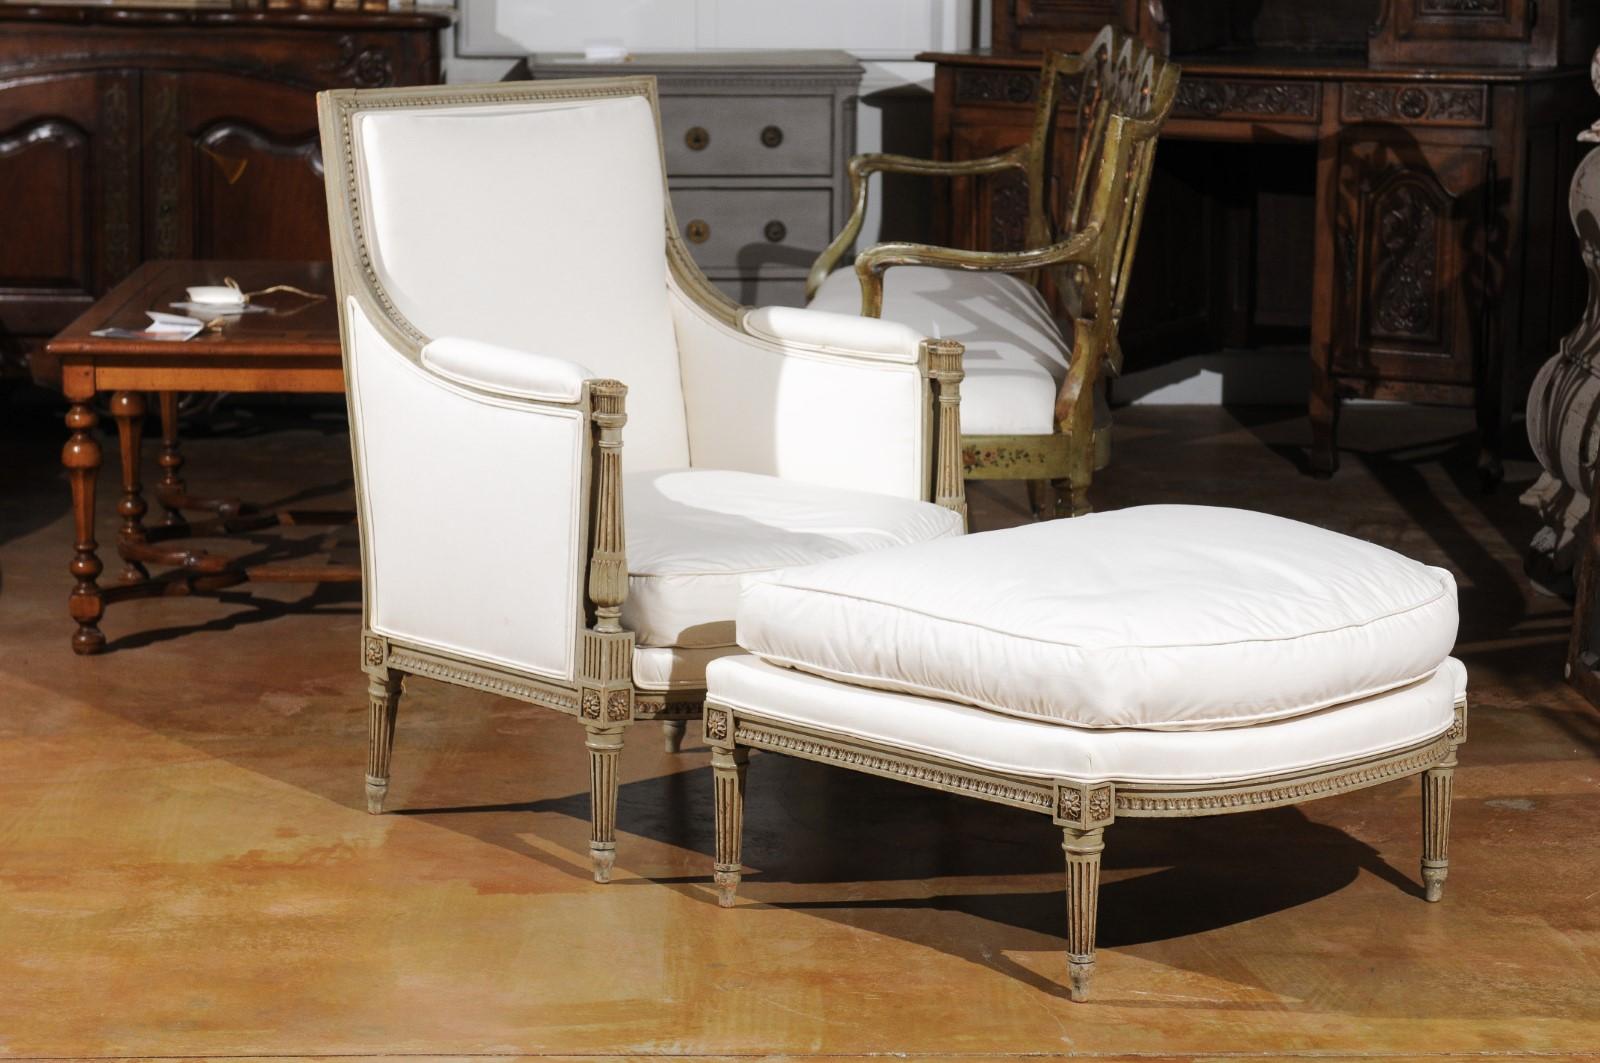 A French Louis XVI style two-part duchesse brisée from the late 19th century, with bergère chair, ottoman and new upholstery. Born in France during the last decade of the 19th century, this duchesse brisée presents the stylistic characteristics of